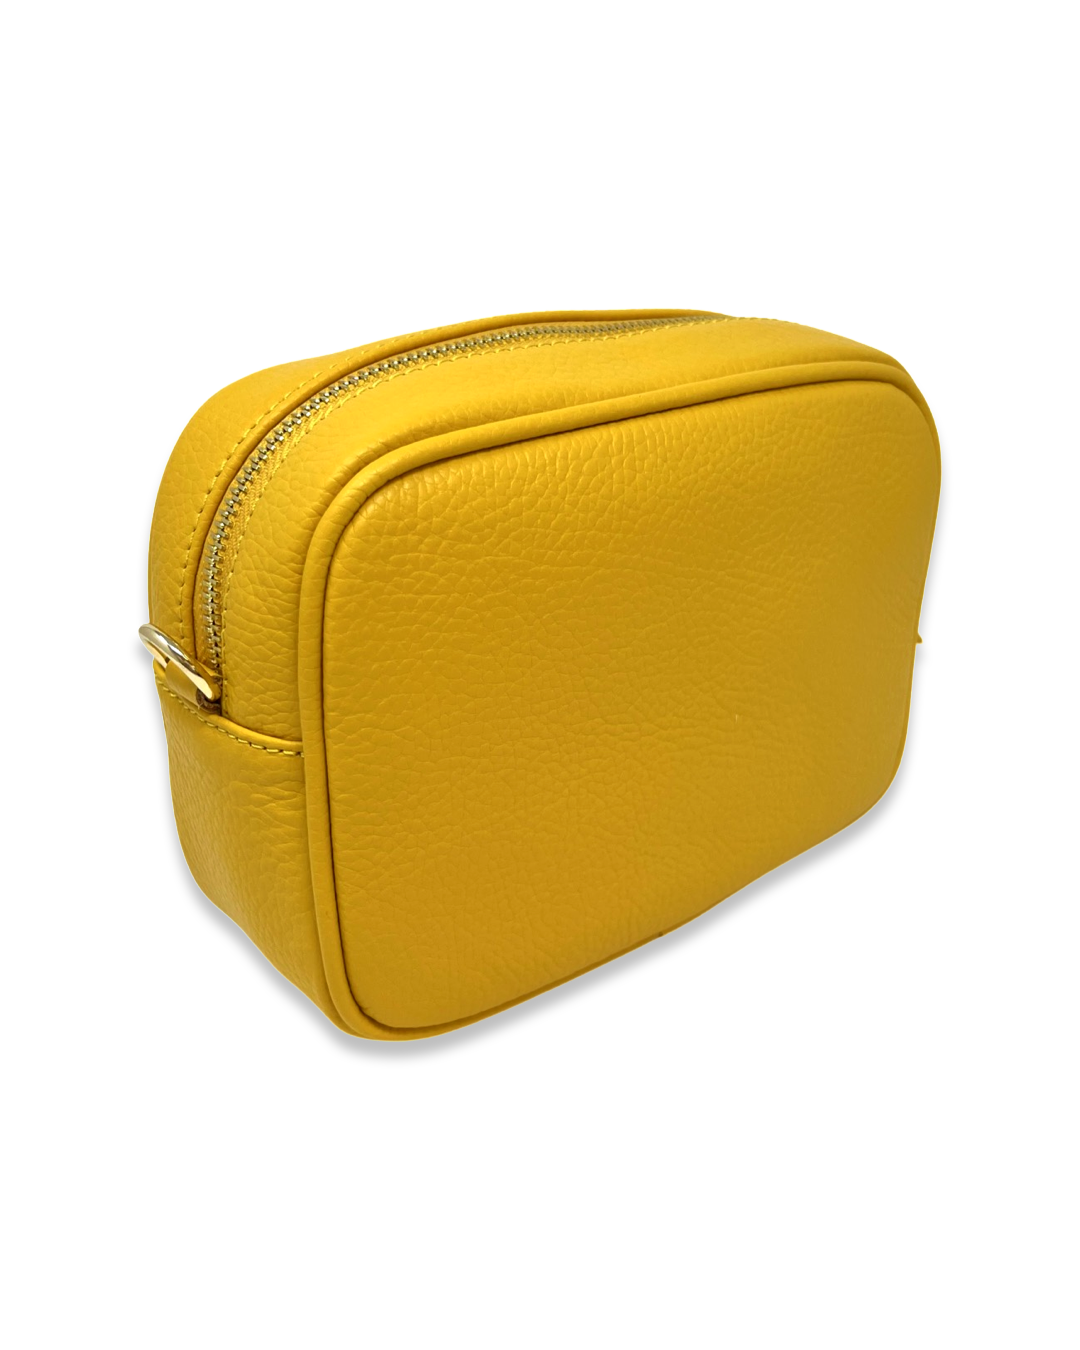 Firenze Bag in Sunny Yellow